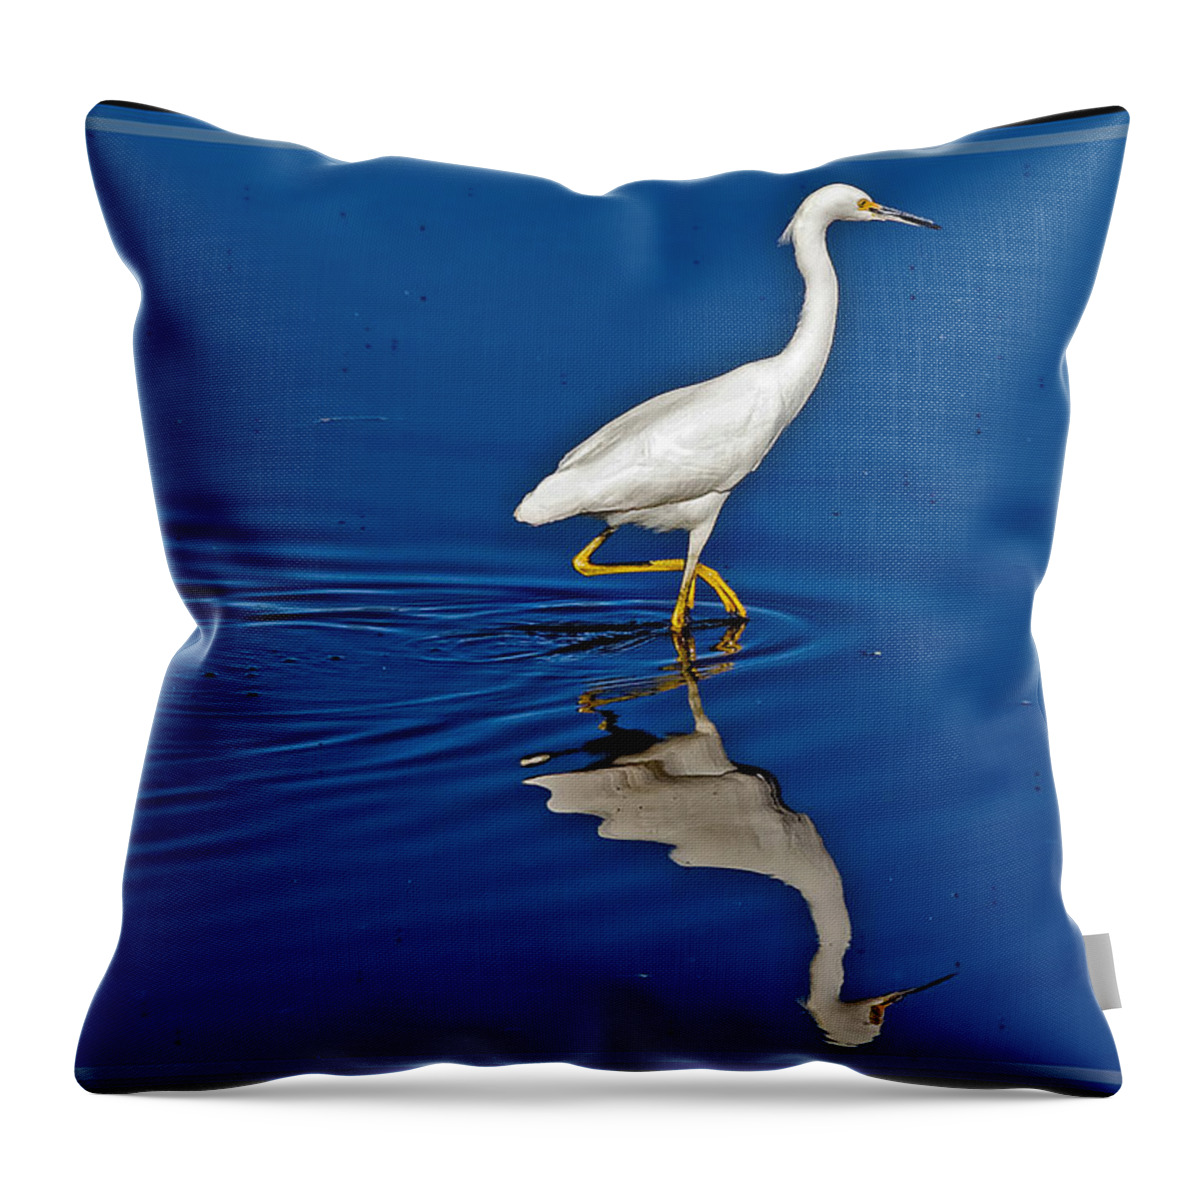 Egret Throw Pillow featuring the photograph Walking Egret by Farol Tomson